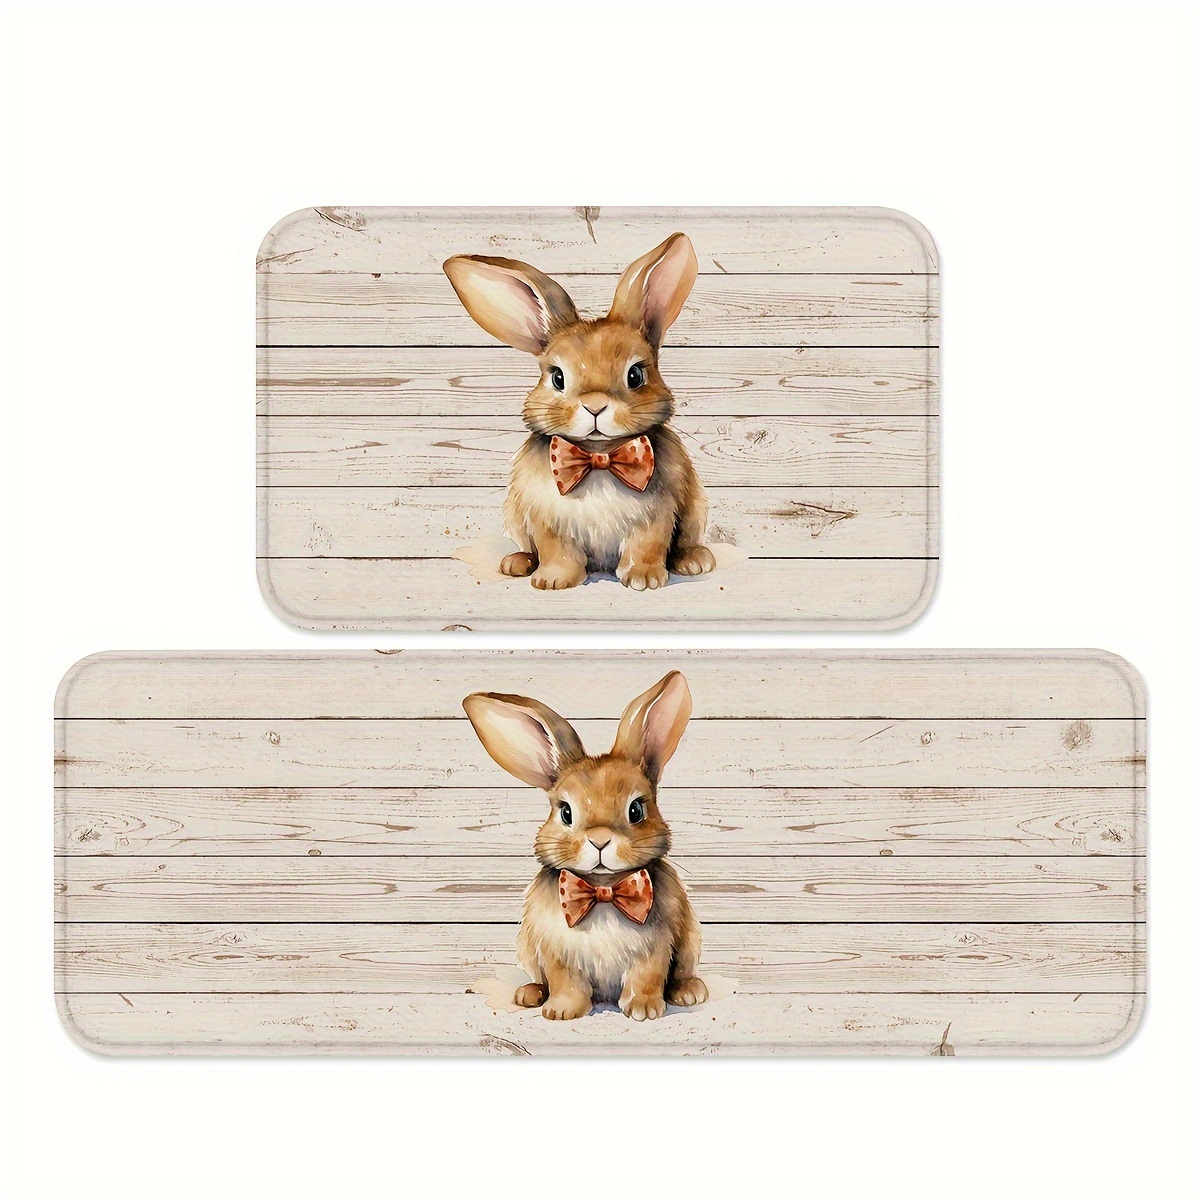 

1/2pcs Easter Bunny Kitchen Mats, Creative Striped Rugs, Non-slip Sofa Cushions, Washable Bathroom Door Mats, For Kitchen, Home Office, Sink, Laundry, Bathroom, Sets 2 Piece